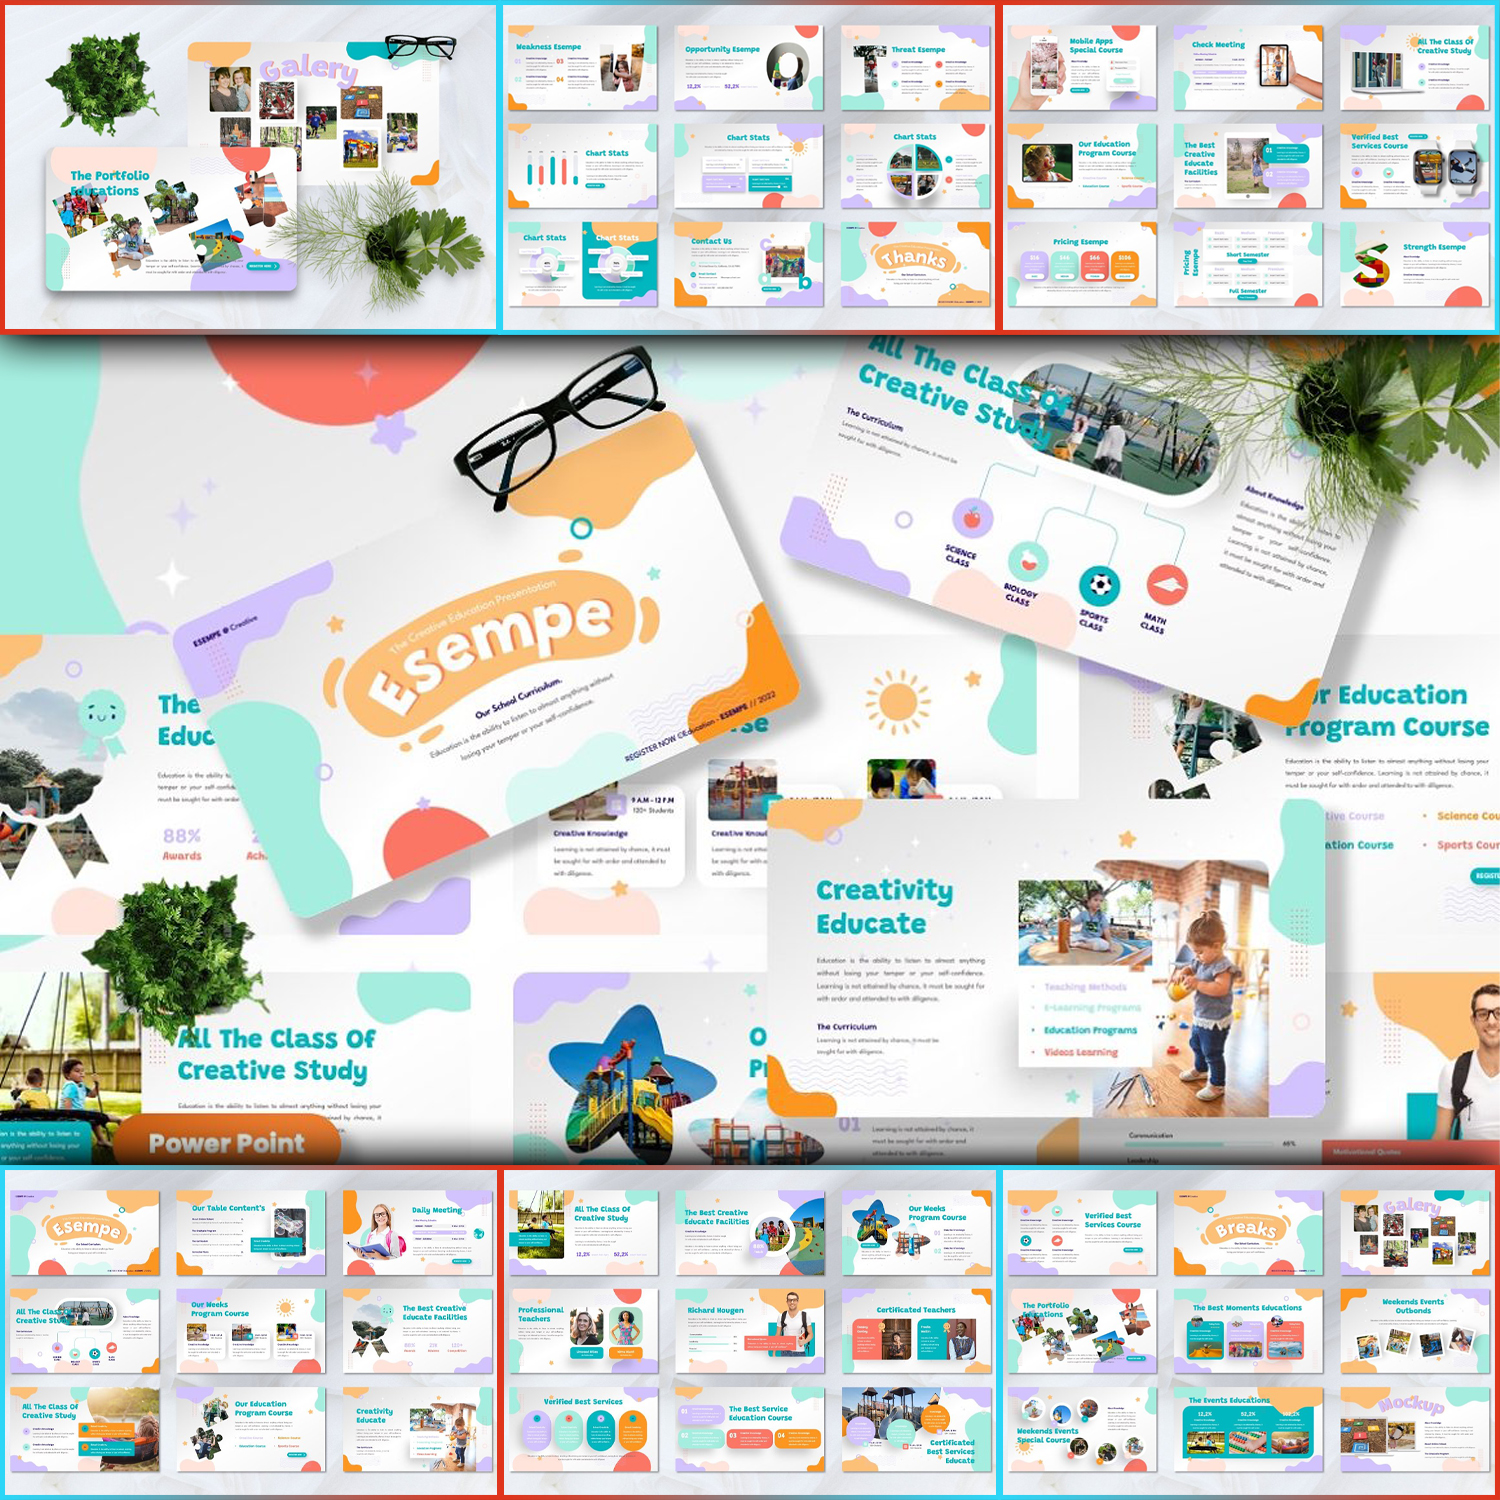 Preview esempe educationcreative powerpoint.